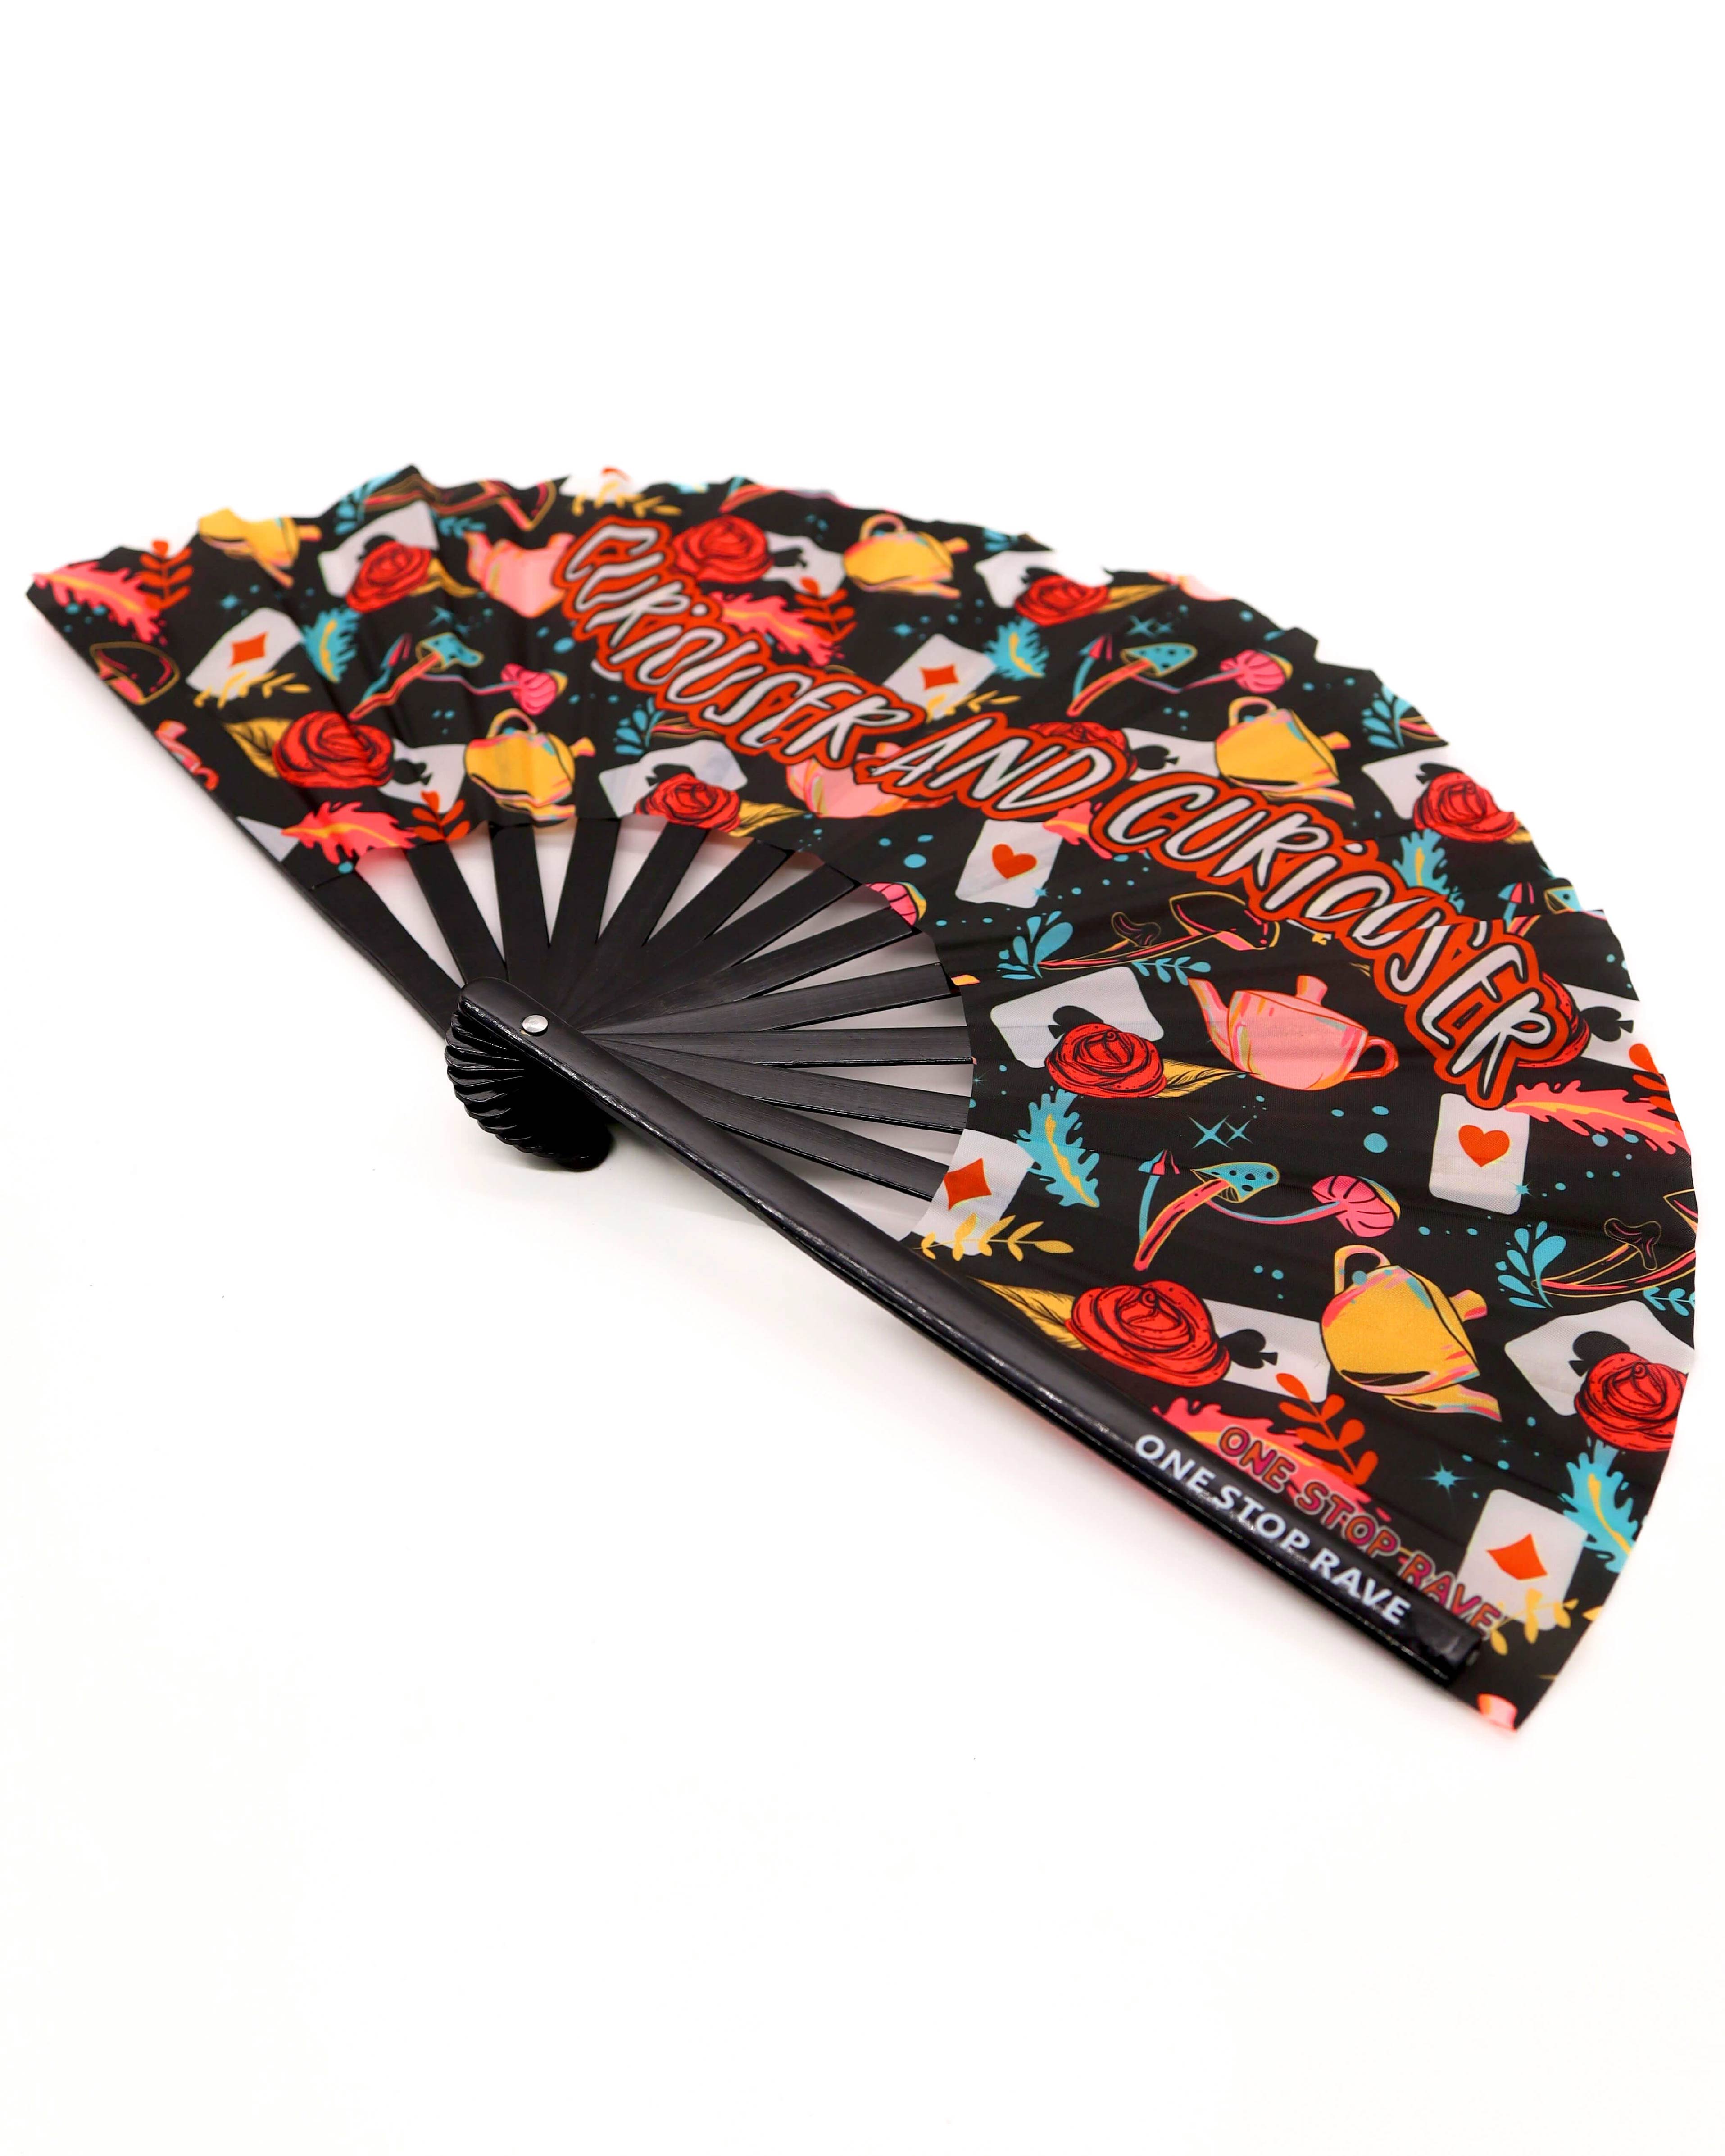 Curiouser and Curiouser Hand Fan, Festival Fans 13.5", - One Stop Rave